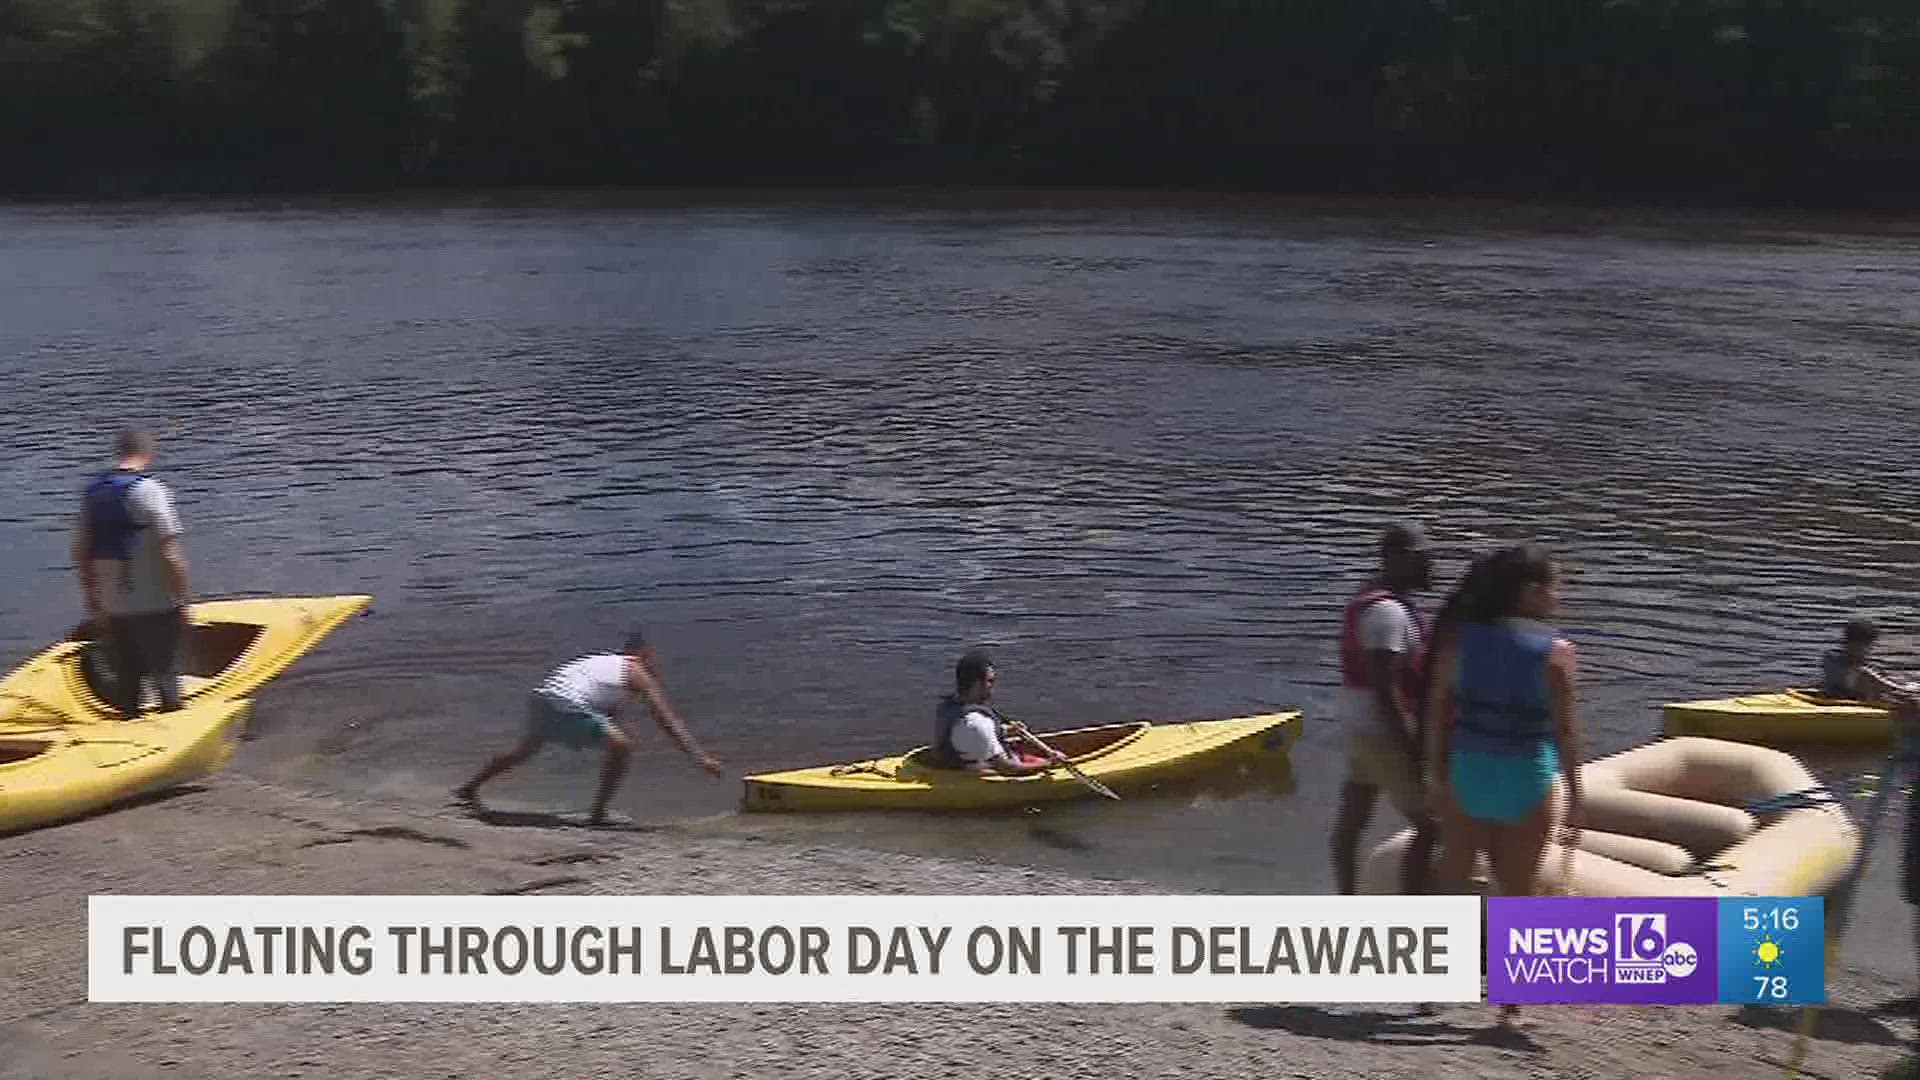 The Delaware River was still a bit high because of last week's storms, but that didn't stop people from having fun on the water.